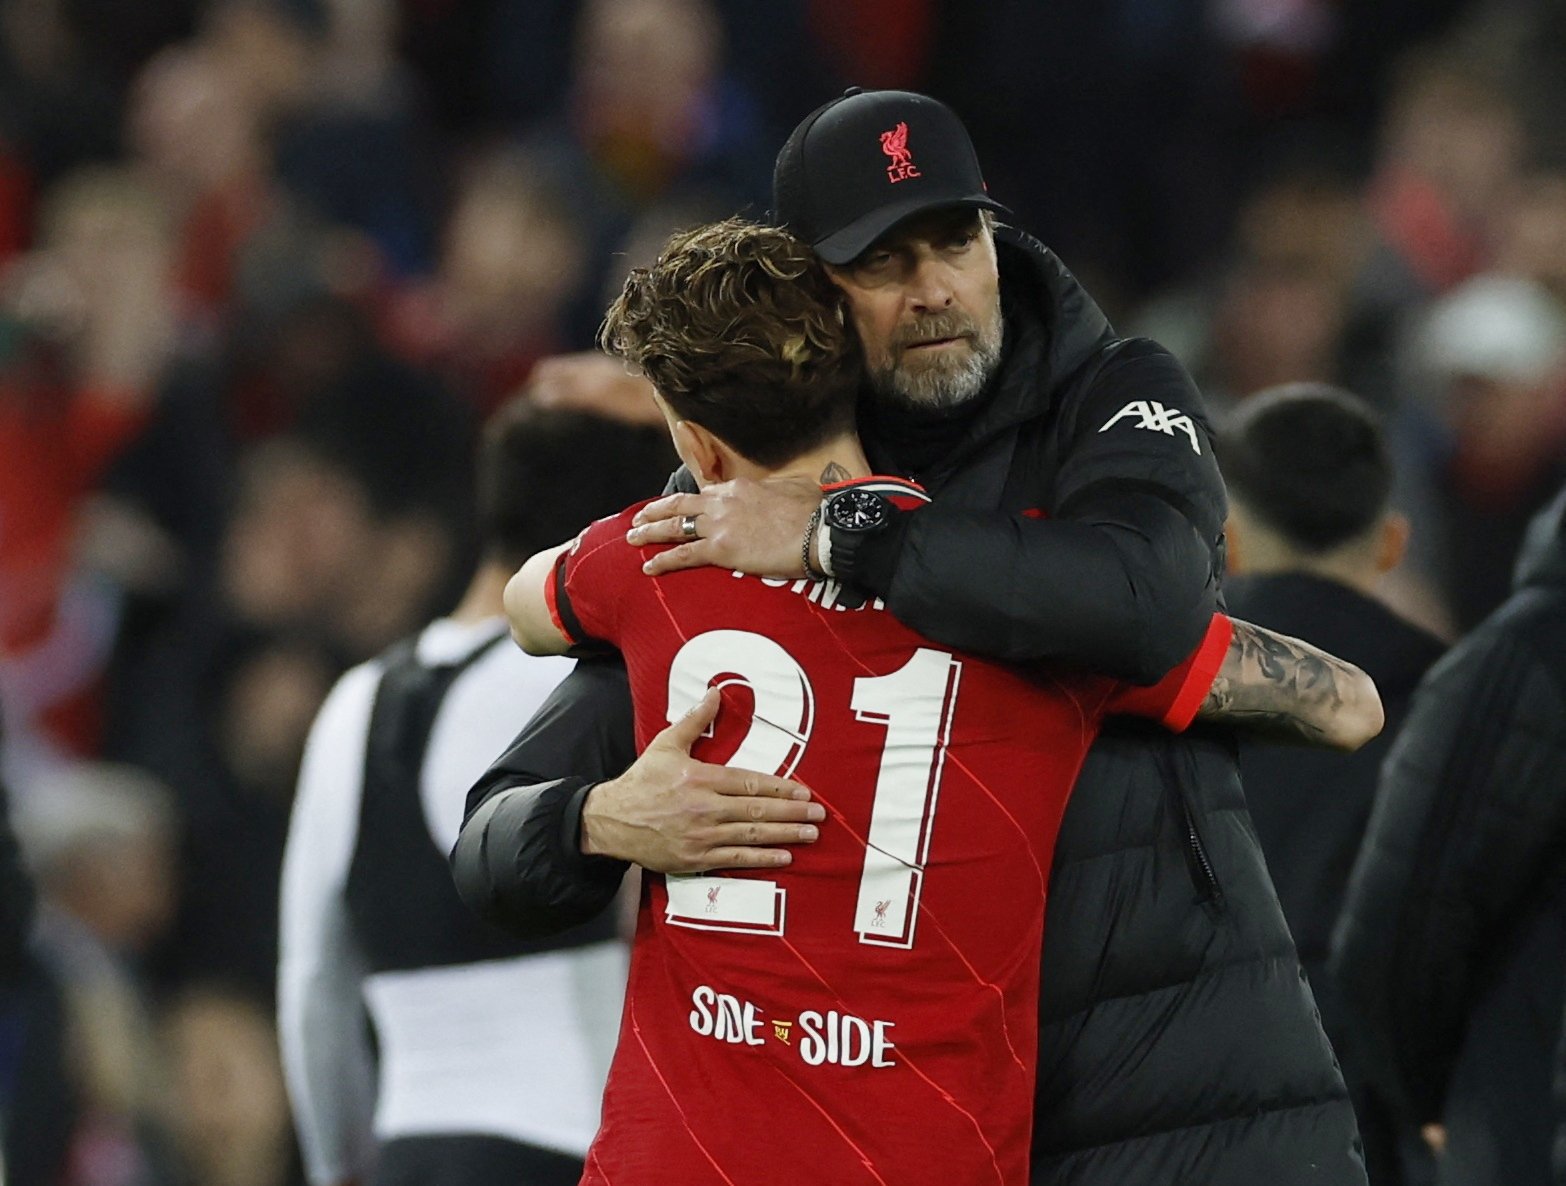 Liverpool manager Jürgen Klopp and Kostas Tsimikas celebrate after the Champions League quarterfinal second leg match between Liverpool and Benfica at Anfield, Liverpool, U.K., Apr. 13, 2022 (Action Images via Reuters/Jason Cairnduff)